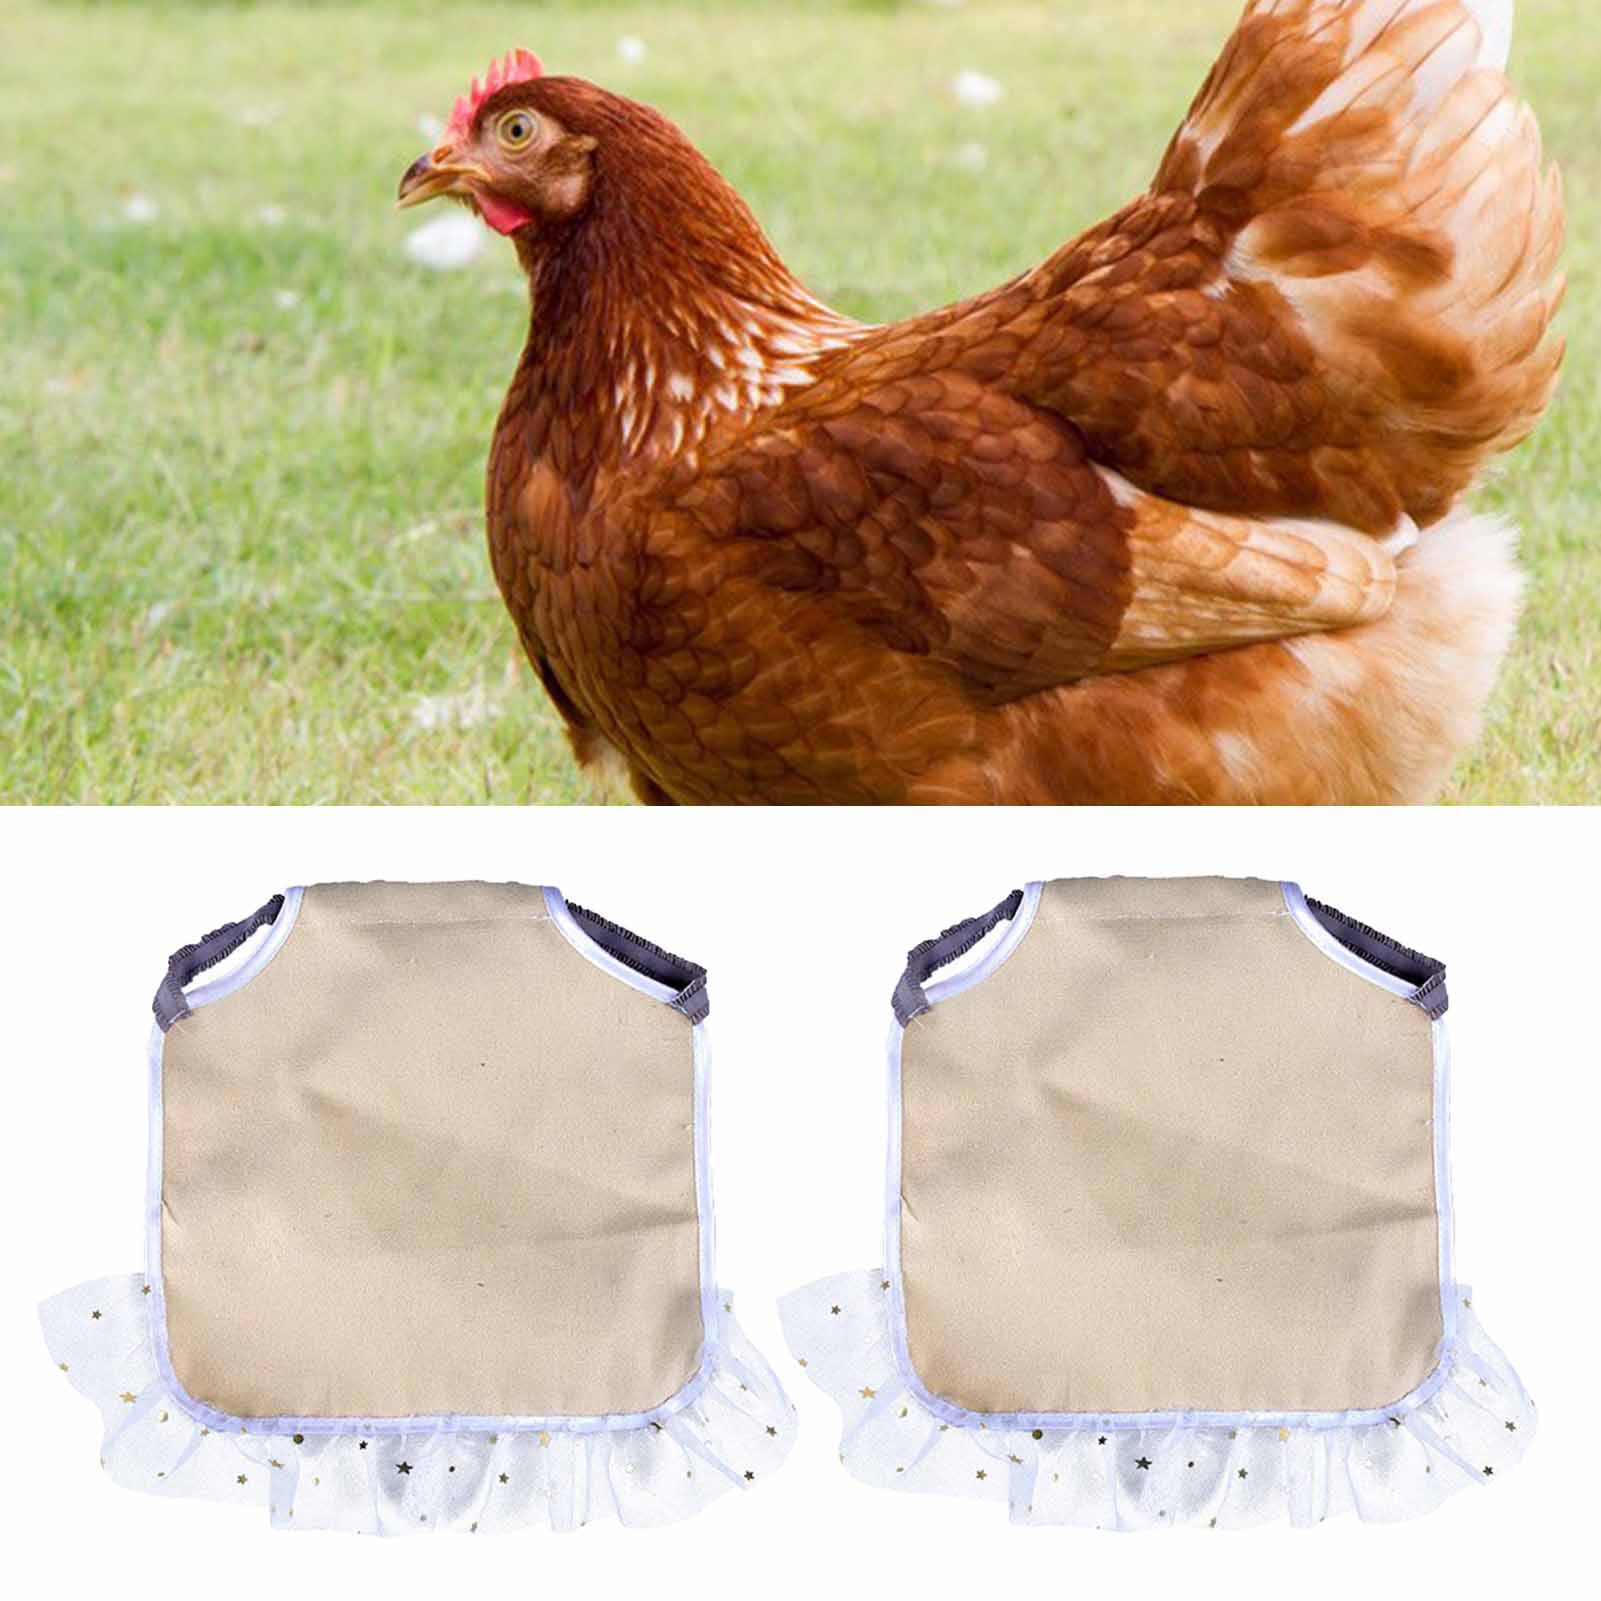 4 CHICKEN SADDLE HEN APRON  FEATHER PROTECTION CHICKEN POULTRY PRODUCTS USA 